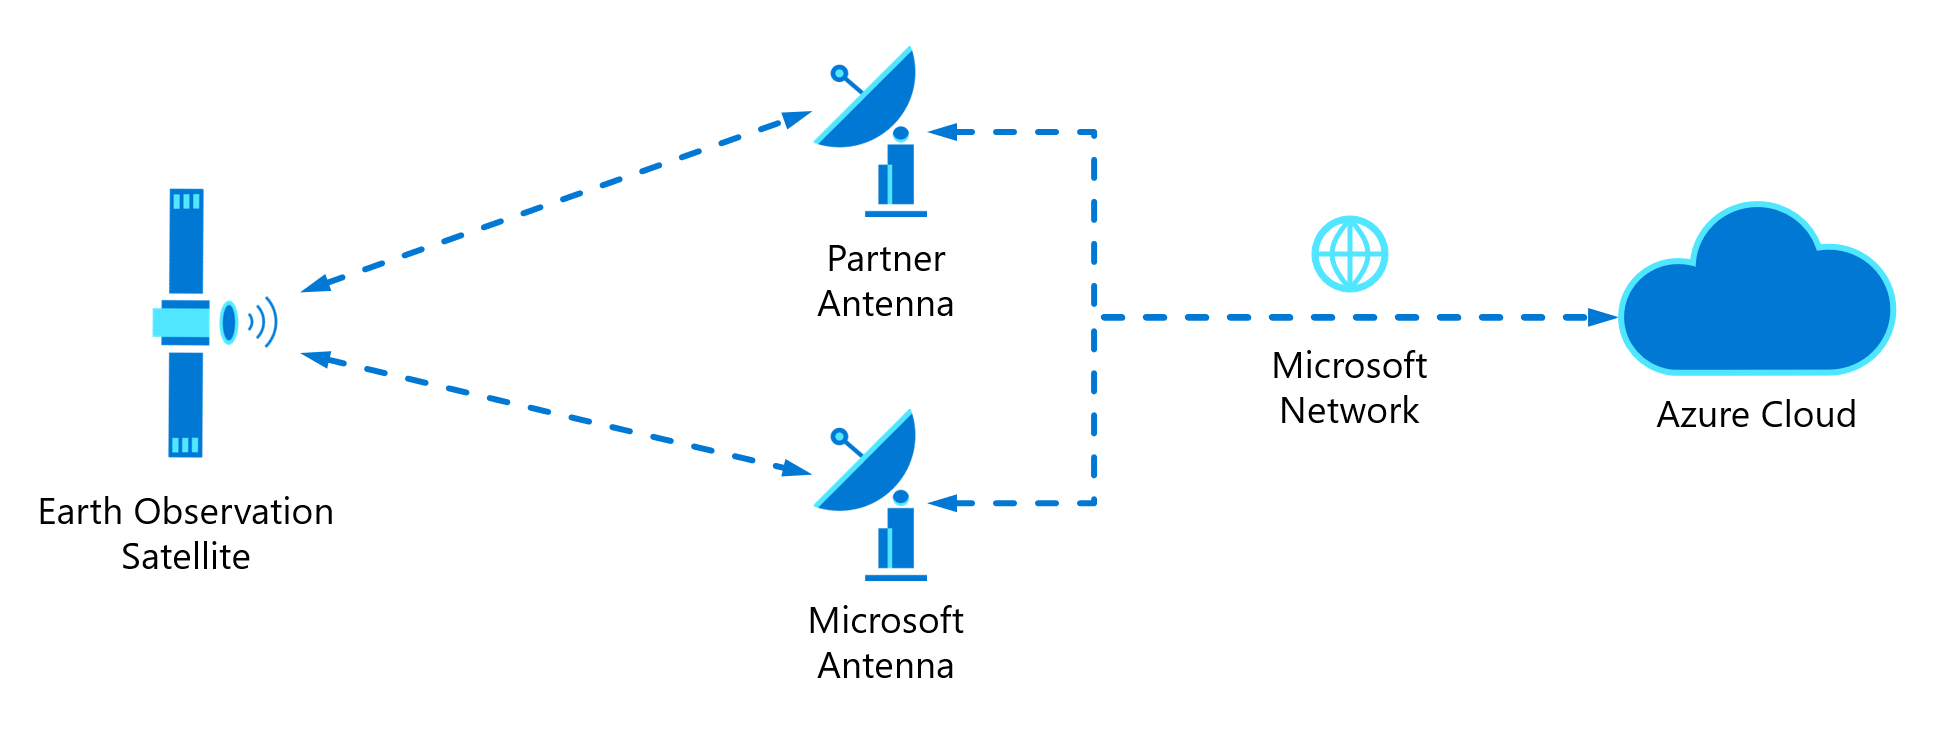 Diagram showing data flowing from a satellite, to Microsoft or Partner ground stations, and landing in the Azure cloud.